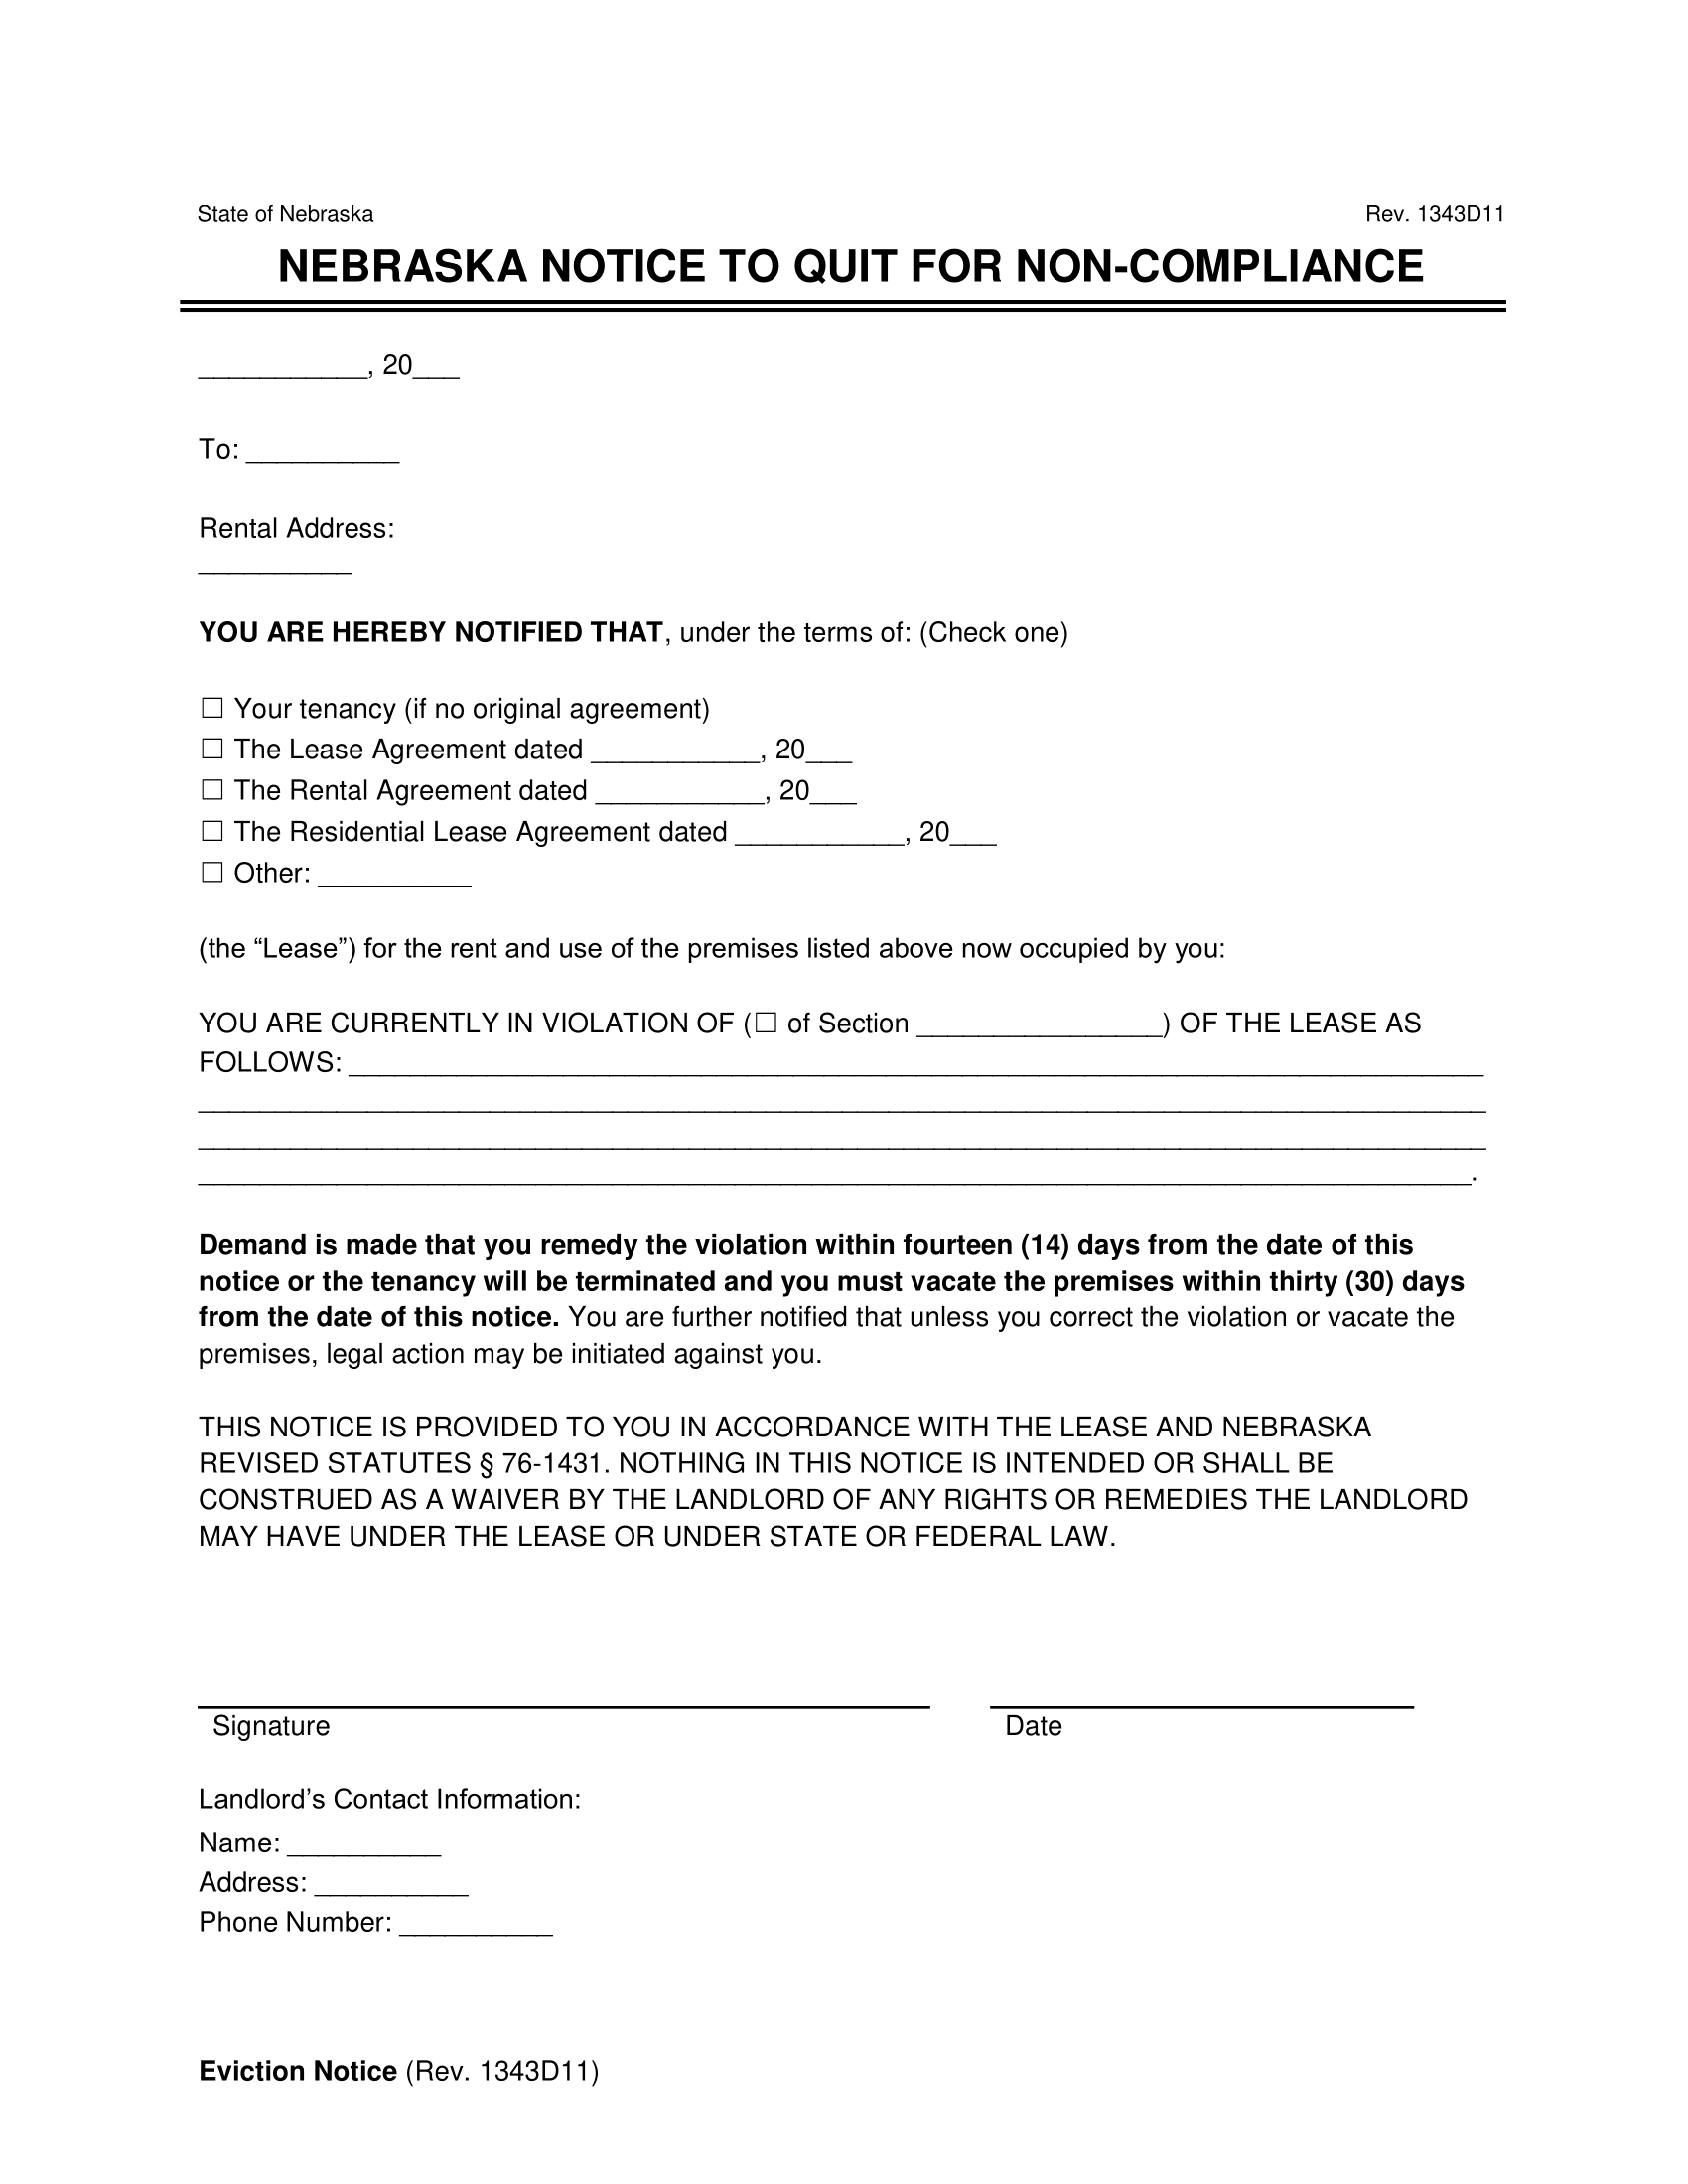 Nebraska Notice to Quit for Non-Compliance